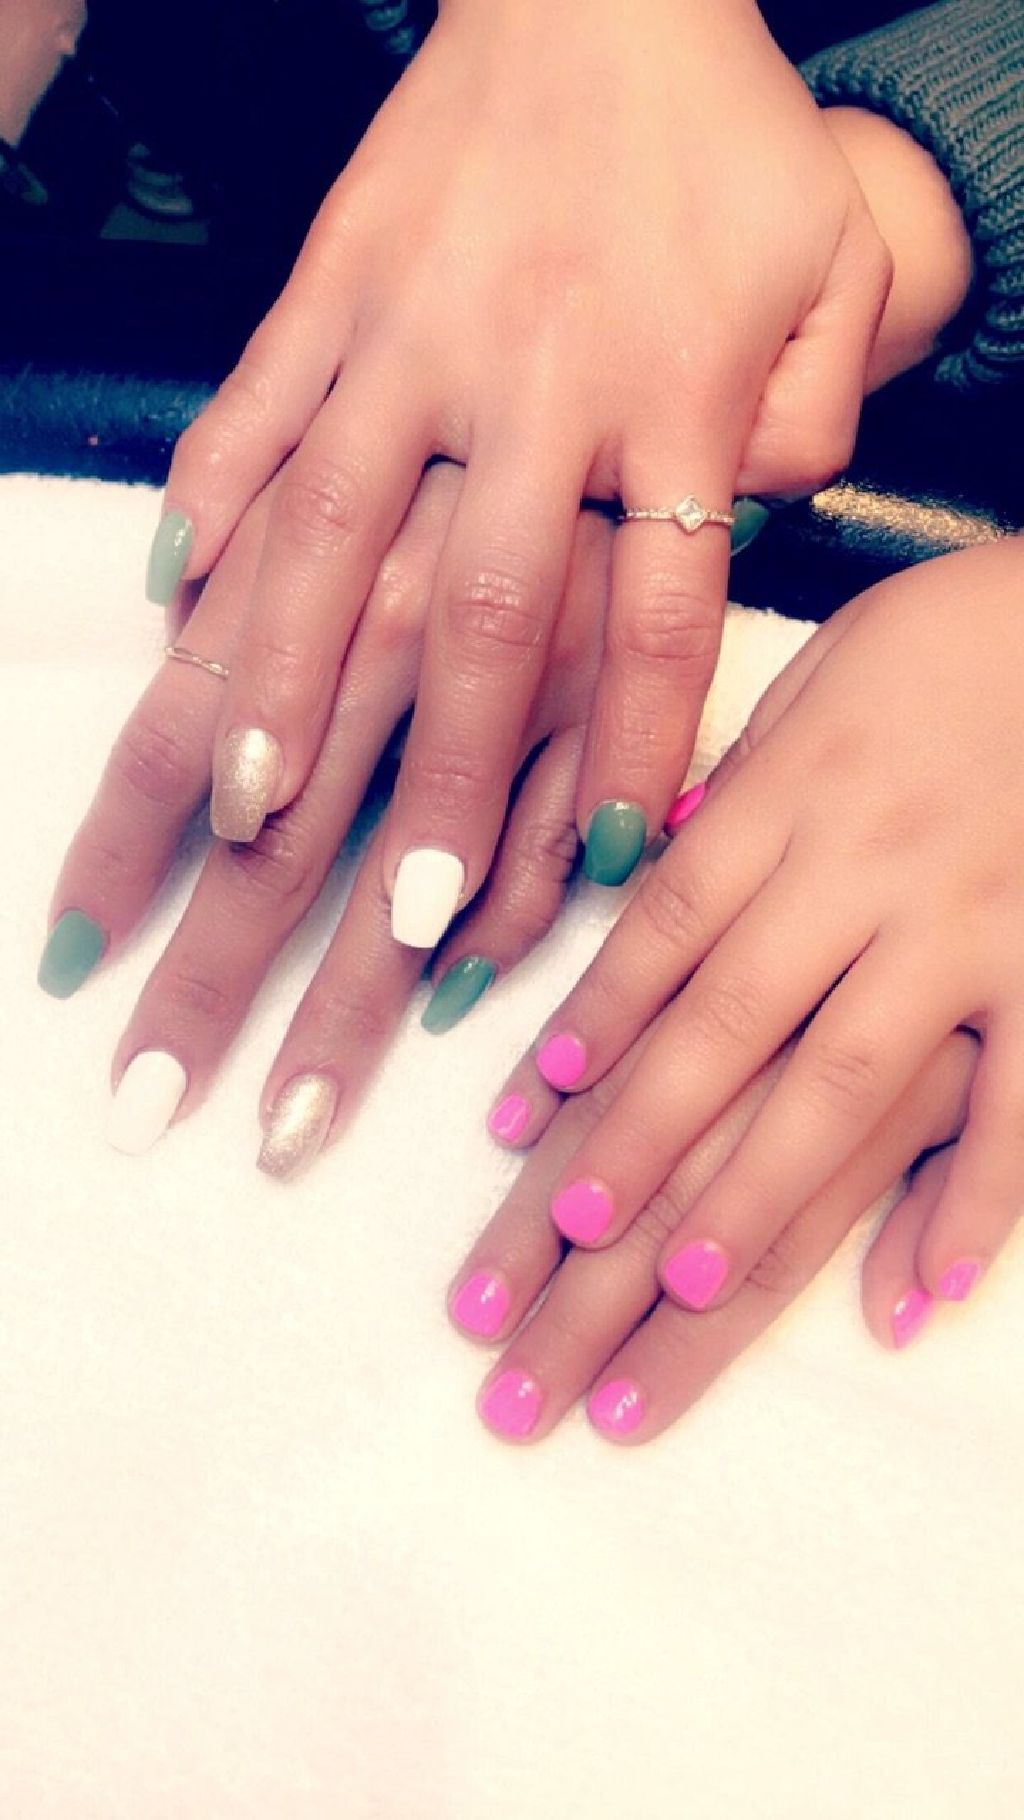 Best Price On Pedicure Near Me - Nail and Manicure Trends